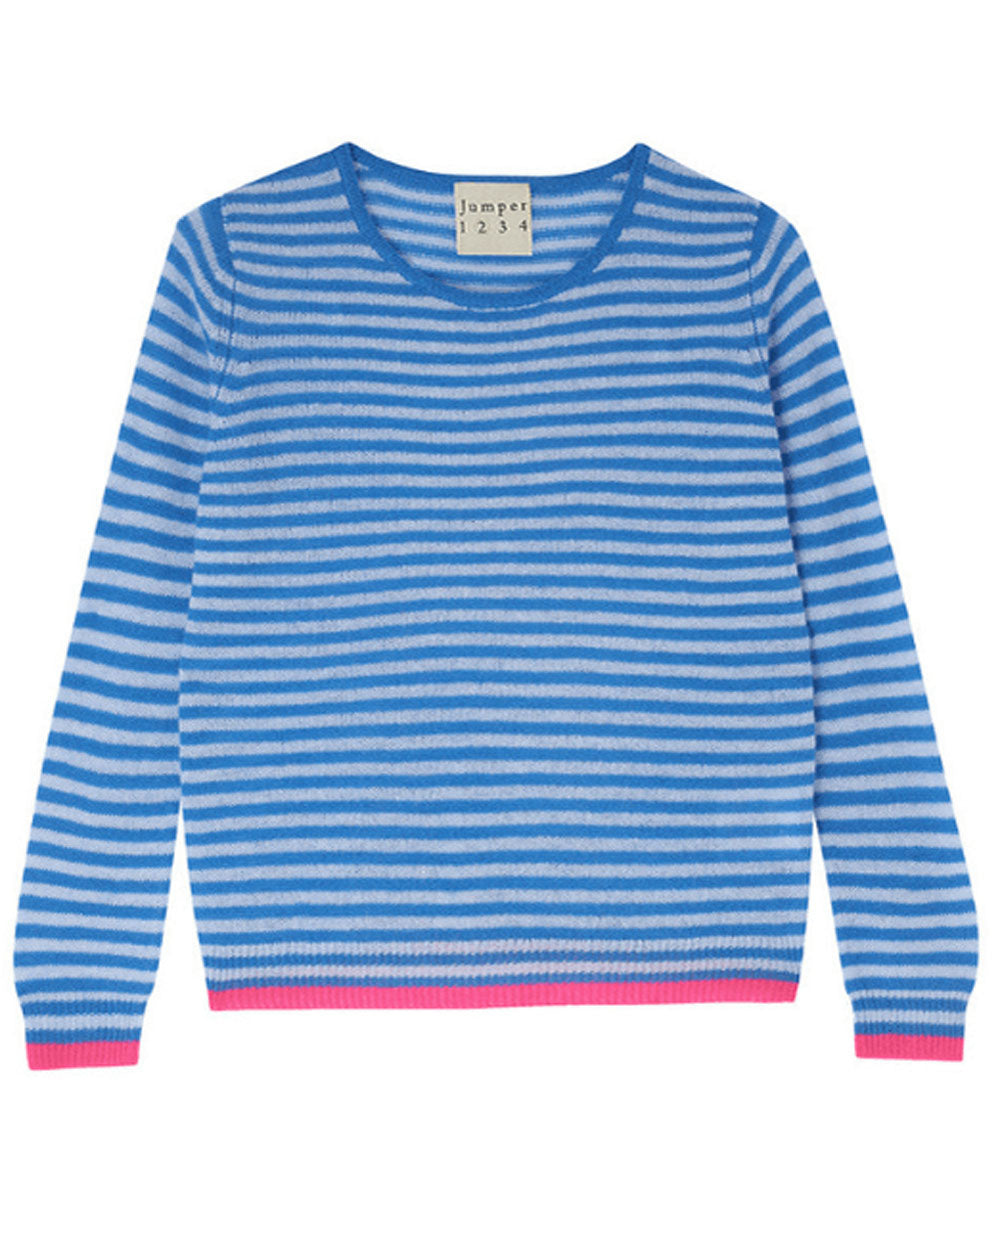 Sky and Neon Pink Little Stripe Crewneck Sweater